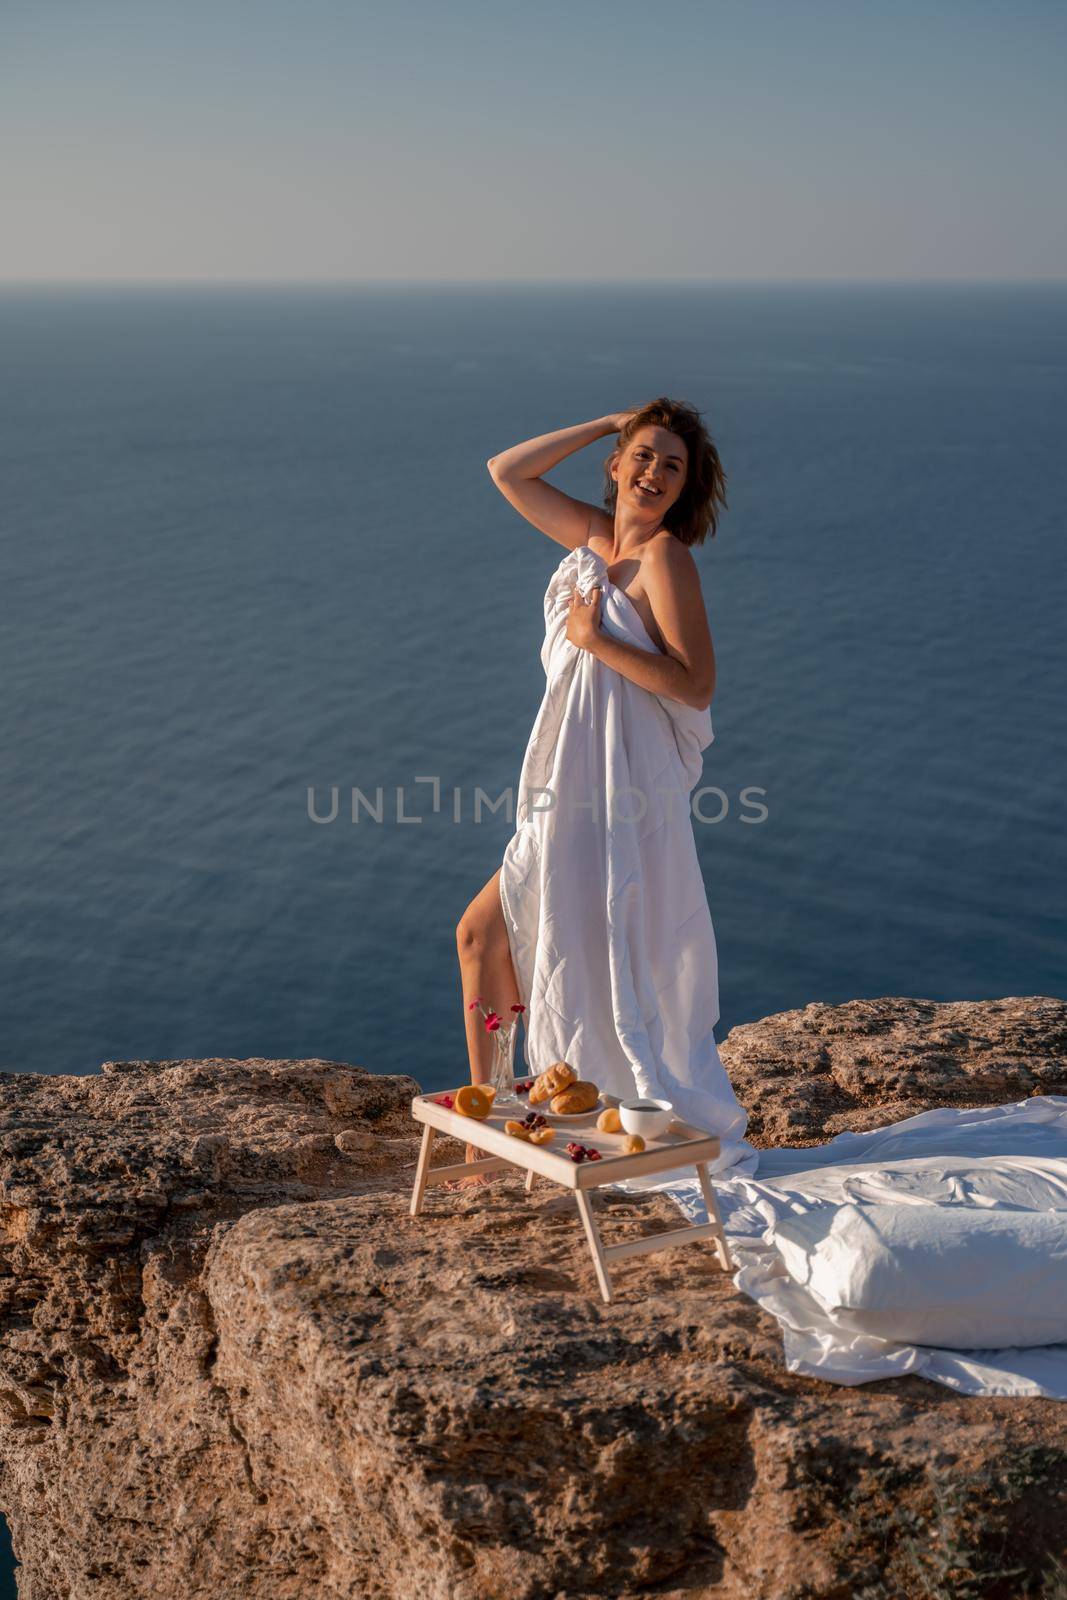 Woman wake up in bed wuth duvet and pillow over nature sea background outdoors. Back view. Good morning. Freedom concept